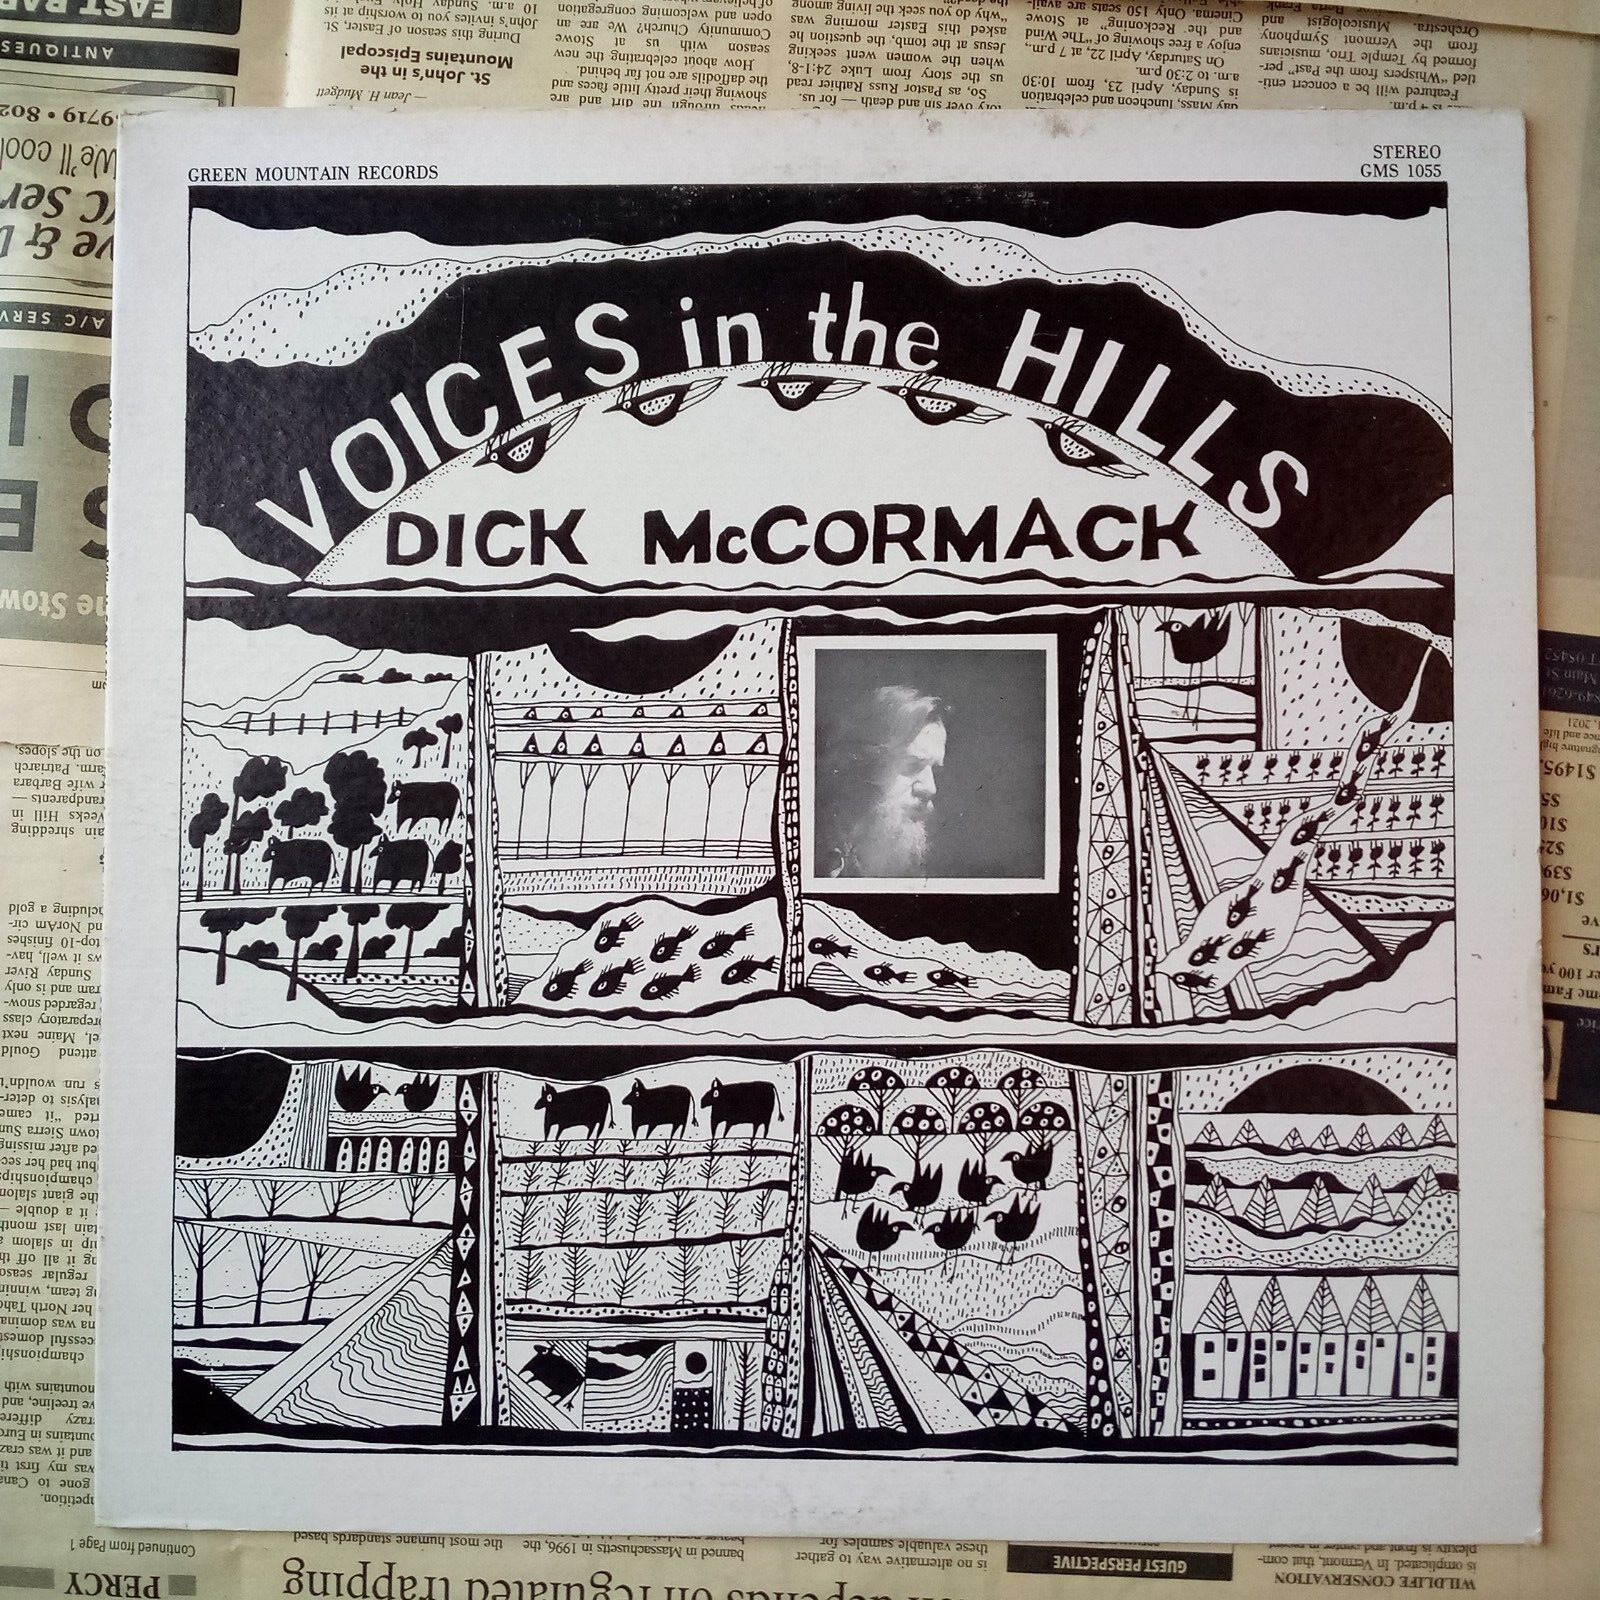 Voices in the Hills - Dick McCormack - Green Mountain Records Vermont GMS-1055